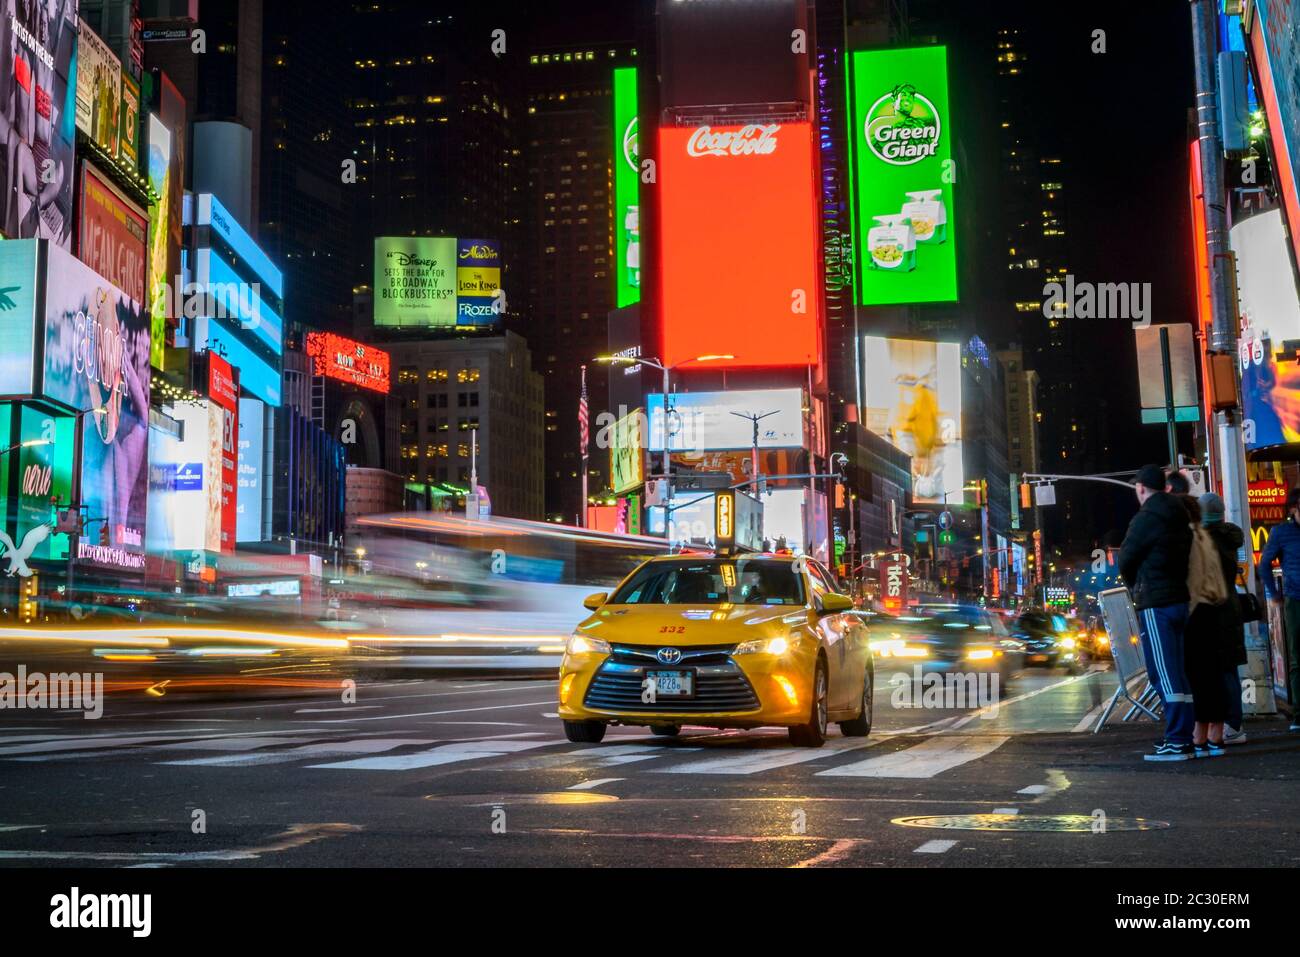 Typical yellow taxi in traffic, Times Square at night, Midtown Manhattan, New York City, New York State, USA Stock Photo